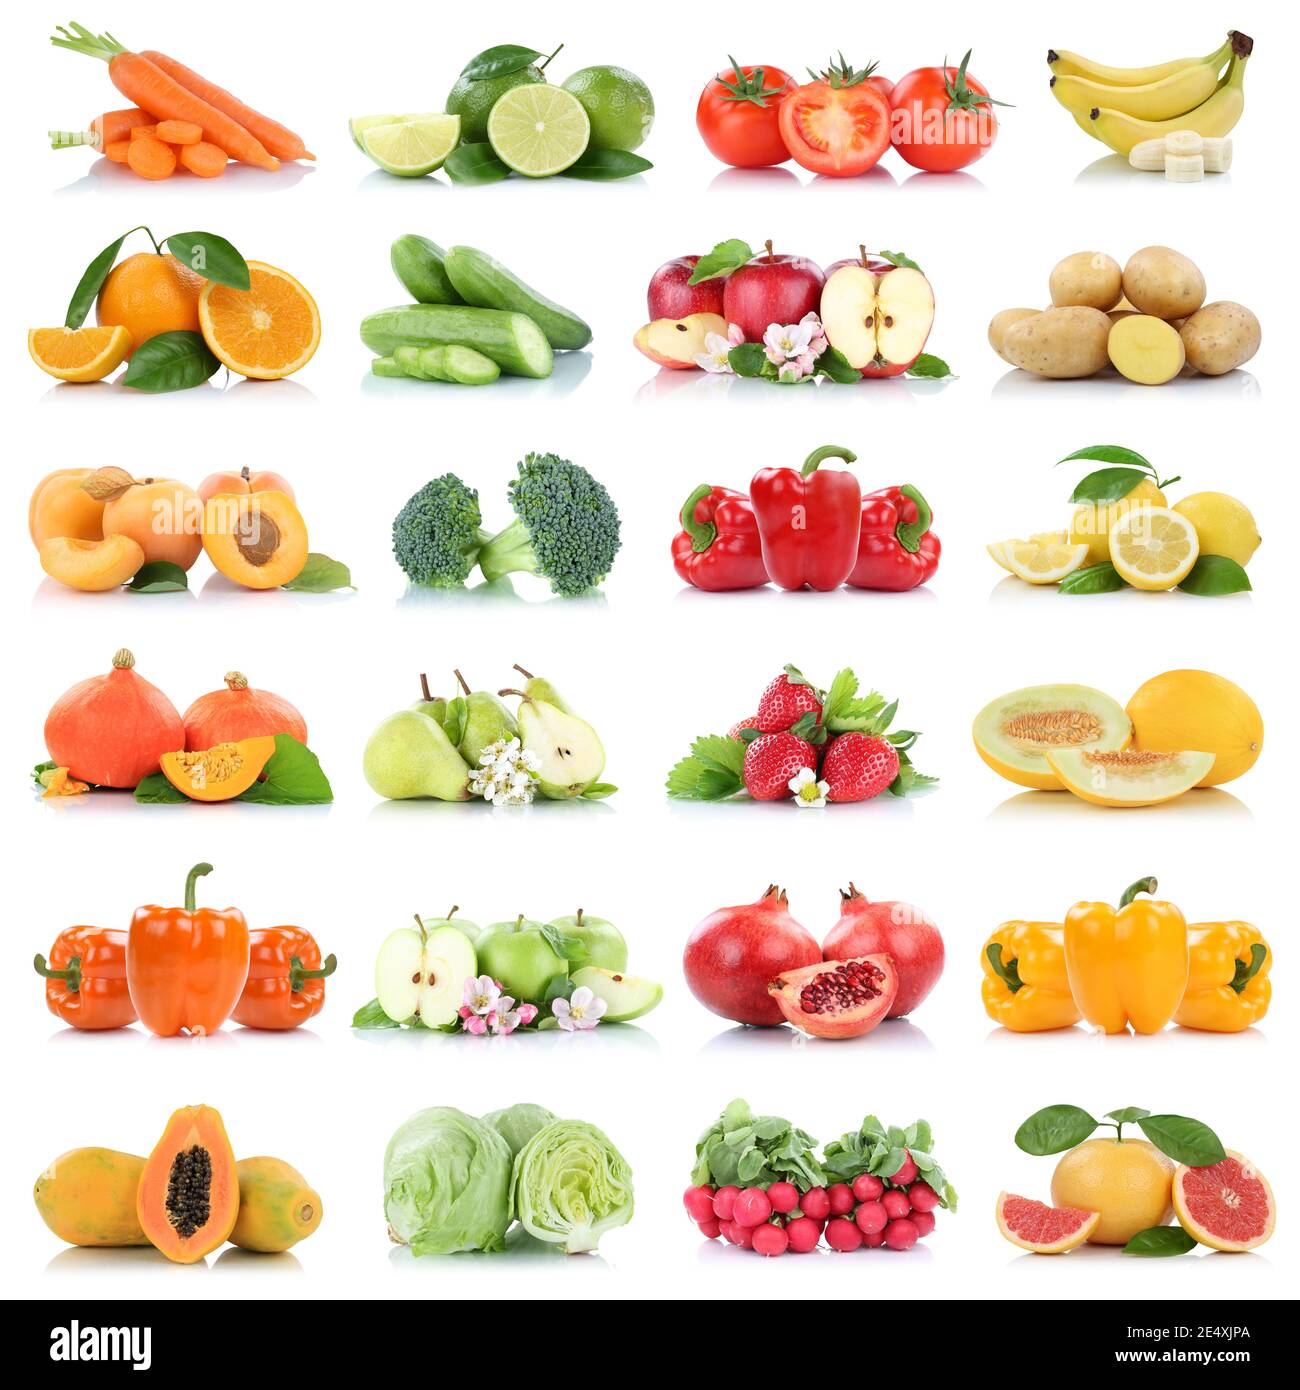 https://c8.alamy.com/comp/2E4XJPA/fruits-vegetables-collection-isolated-apple-apples-oranges-lettuce-tomatoes-colors-fresh-fruit-on-a-white-background-2E4XJPA.jpg